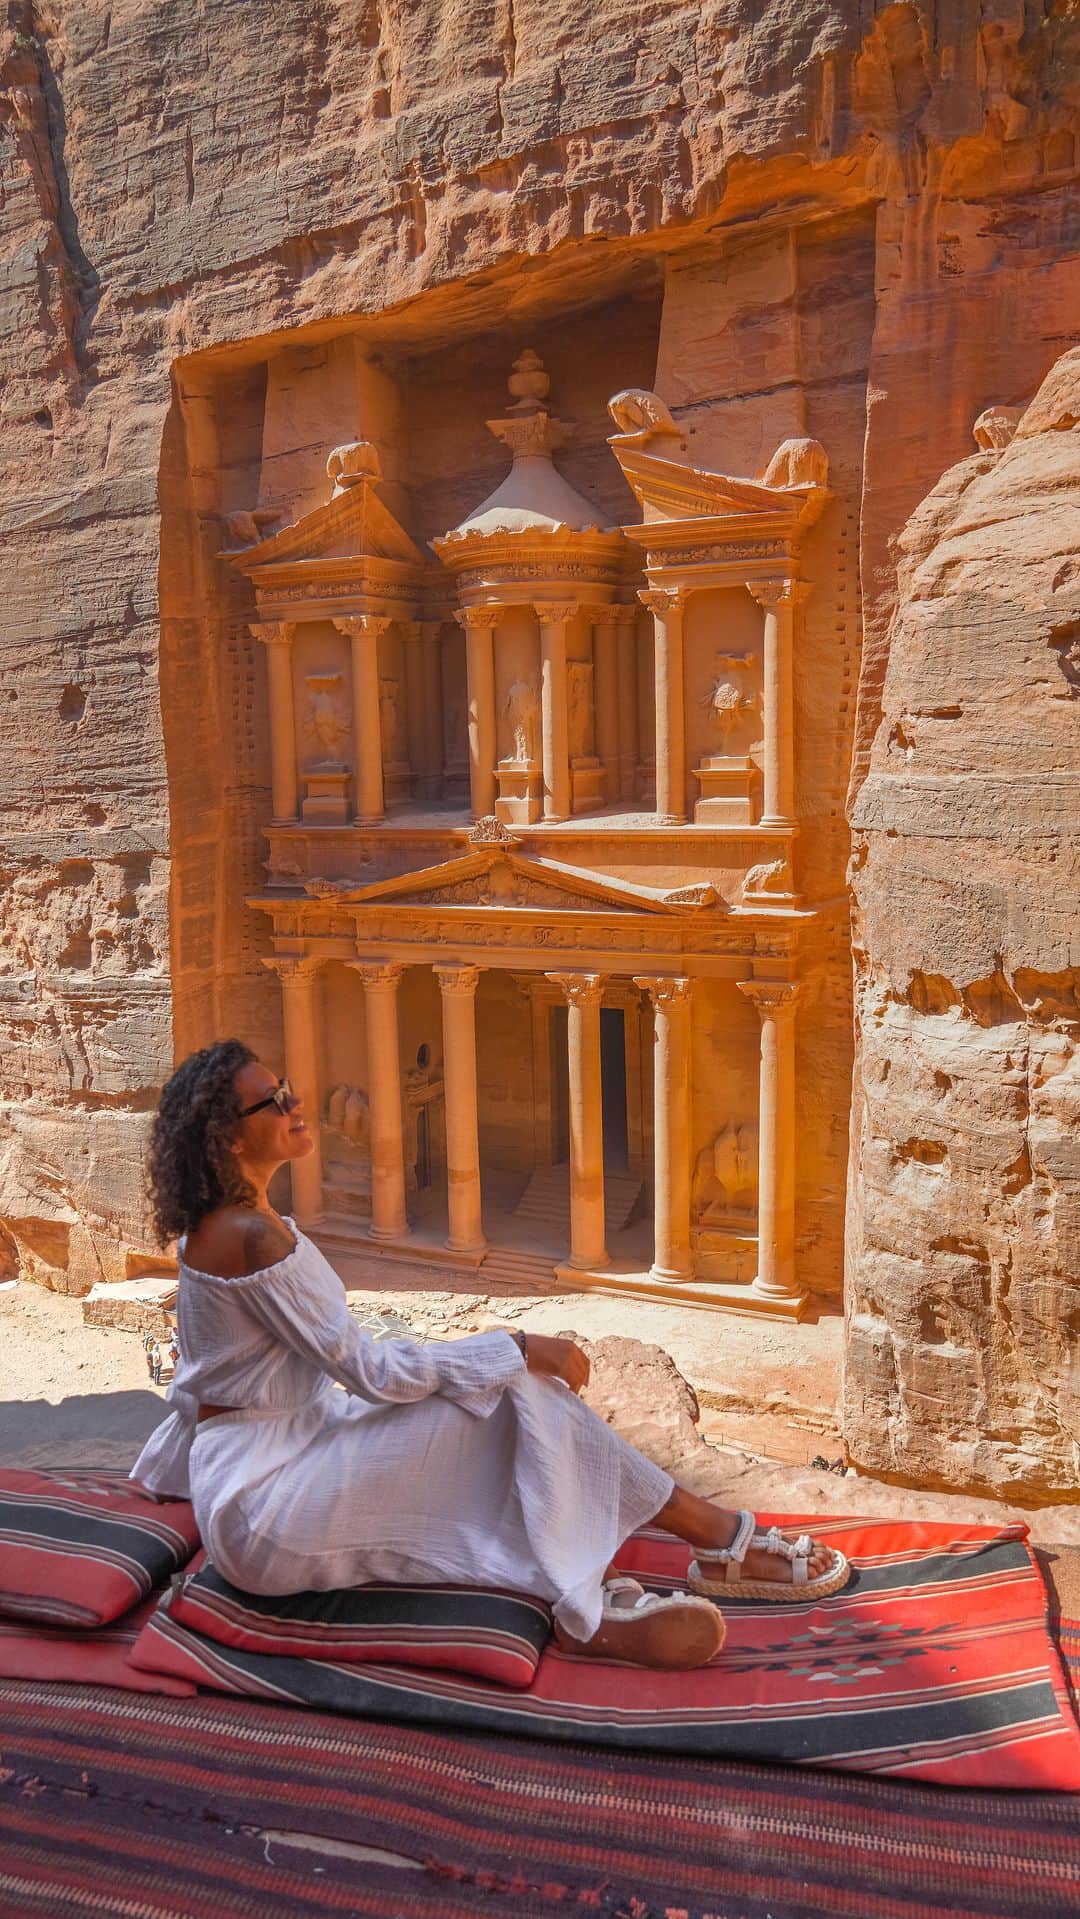 Wonderful Placesのインスタグラム：「The ultimate road trip itinerary for your Jordan trip 🇯🇴  📌Save this for later  - PETRA : 1 or 2 days in Petra is a must. Go early in the morning ( the site opens at 6:30 am) to avoid finding too many tourists and the excessive heat  - DEAD SEA : Floating in the dead sea is definitely an experience to put on your bucket list! You can find the most beautiful Area by searching POINT DE VUE on google maps ( is the right location)   - WADI RUM : Sleeping a night in the Jordan desert in transparent igloos is an experience you will not easily forget. We also recommend taking a jeep safari in the desert  - WADI MUJIB : To end with an adventurous experience, the exploration of a canyon is definitely to be included in the trip  #jordan #giordania #wadirum #petra #petrajordan #wadirumdesert #wadimujib #canyon #deadsea #deadseajordan #traveltips #travelmore #bucketlist」